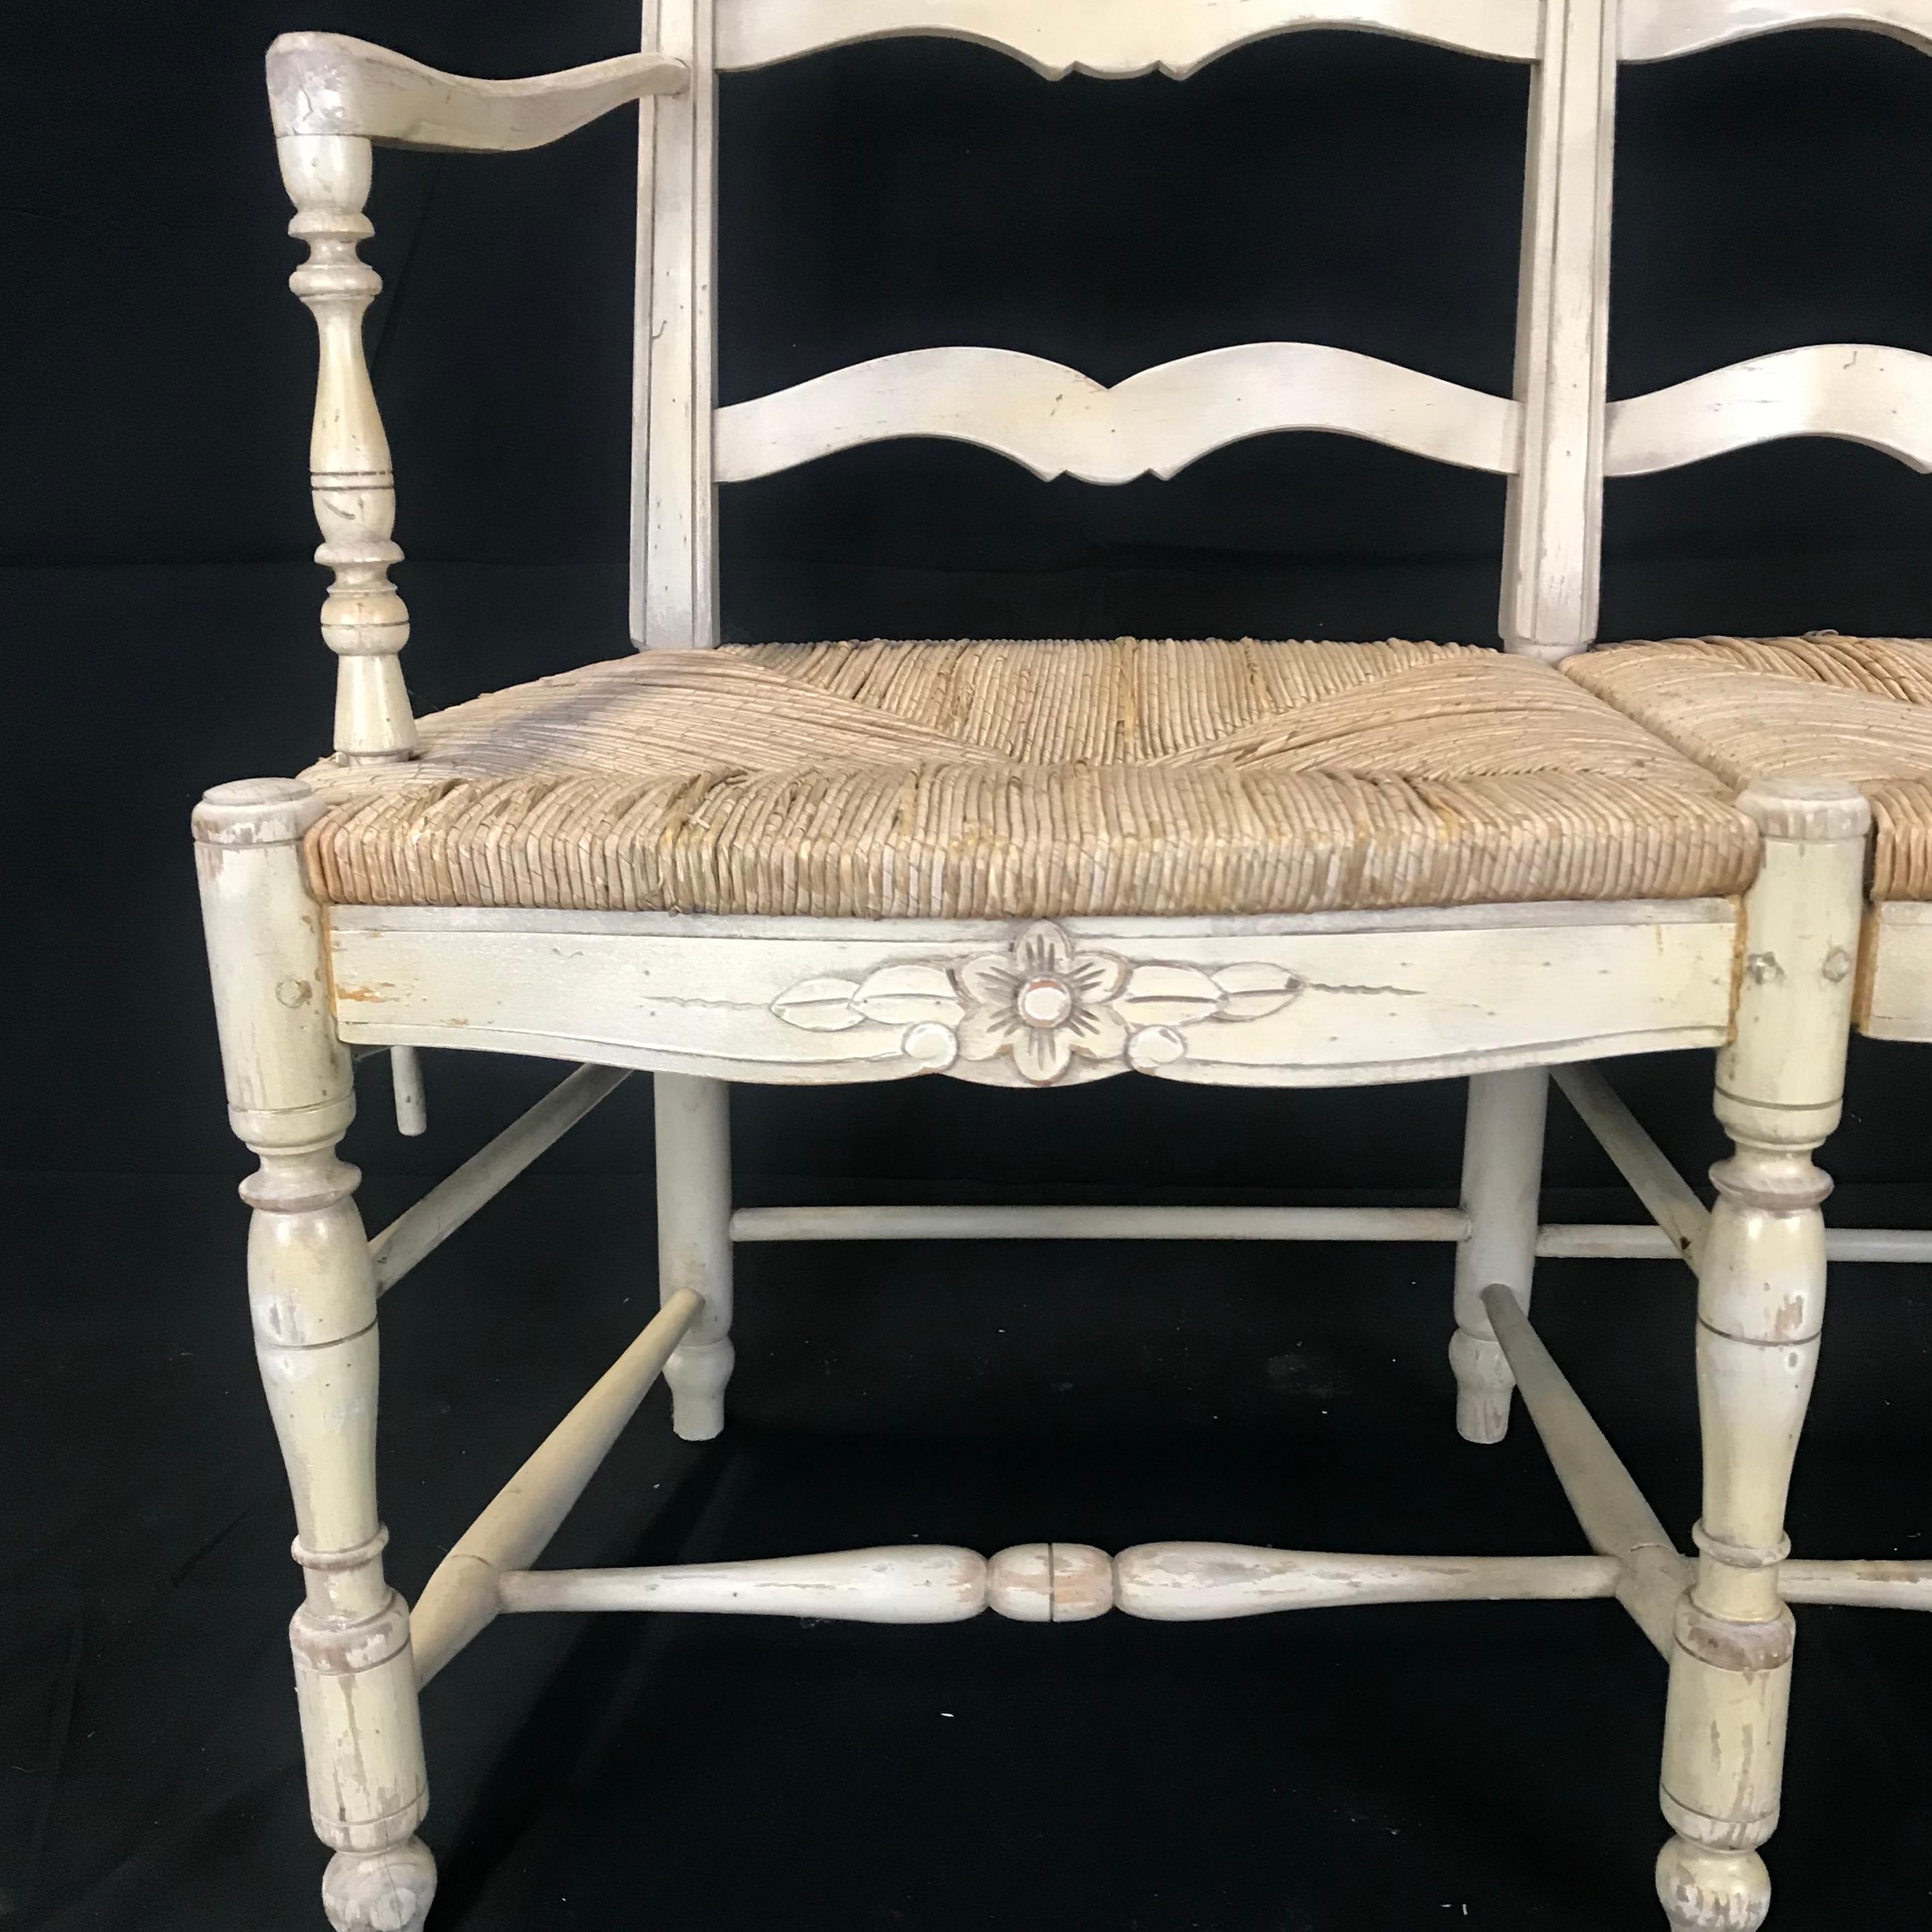 19th century French country loveseat sofa or bench carved to perfection with a floral motif and retaining its original neutral colored cream paint, having six turned legs and stretchers,
 circa 1880s.
#4342
Measures: Seat 17.5” x H arm 27.75”.